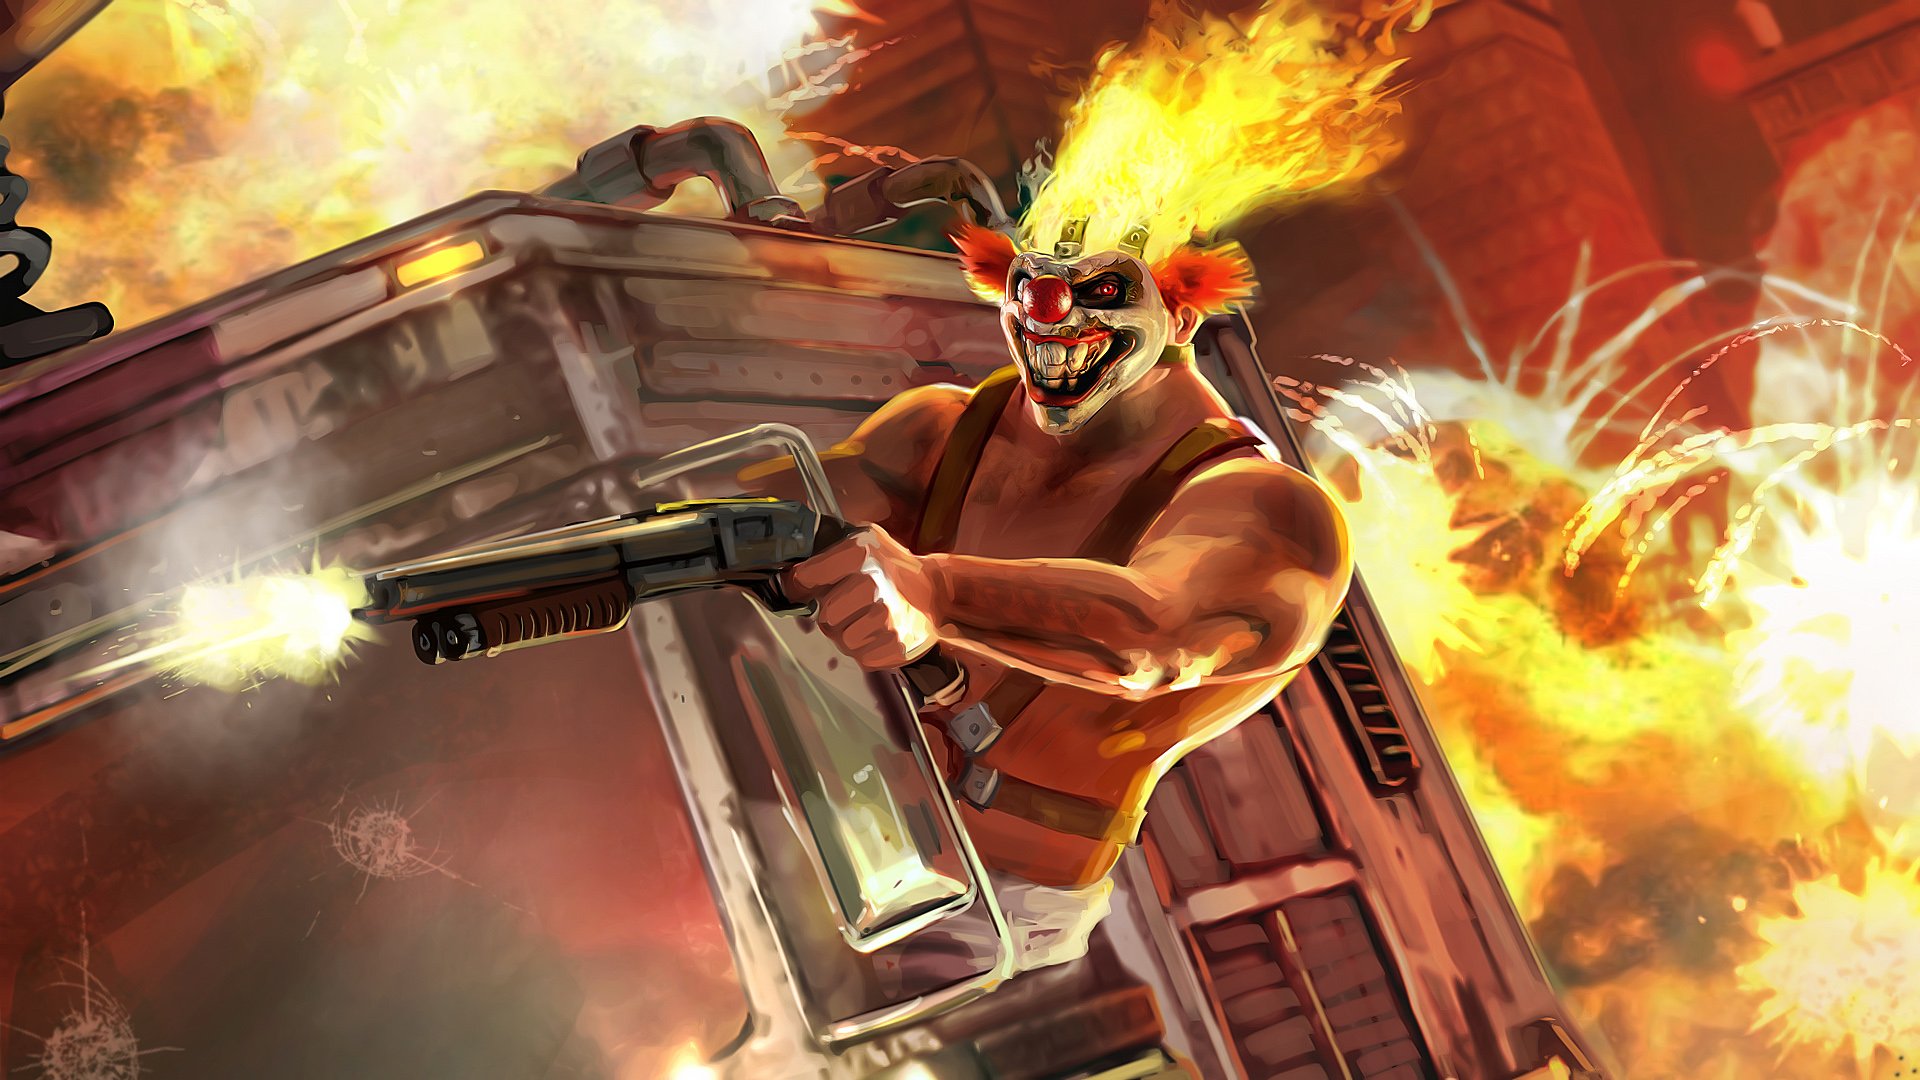 Twisted Metal Characters the Series Needs To Include